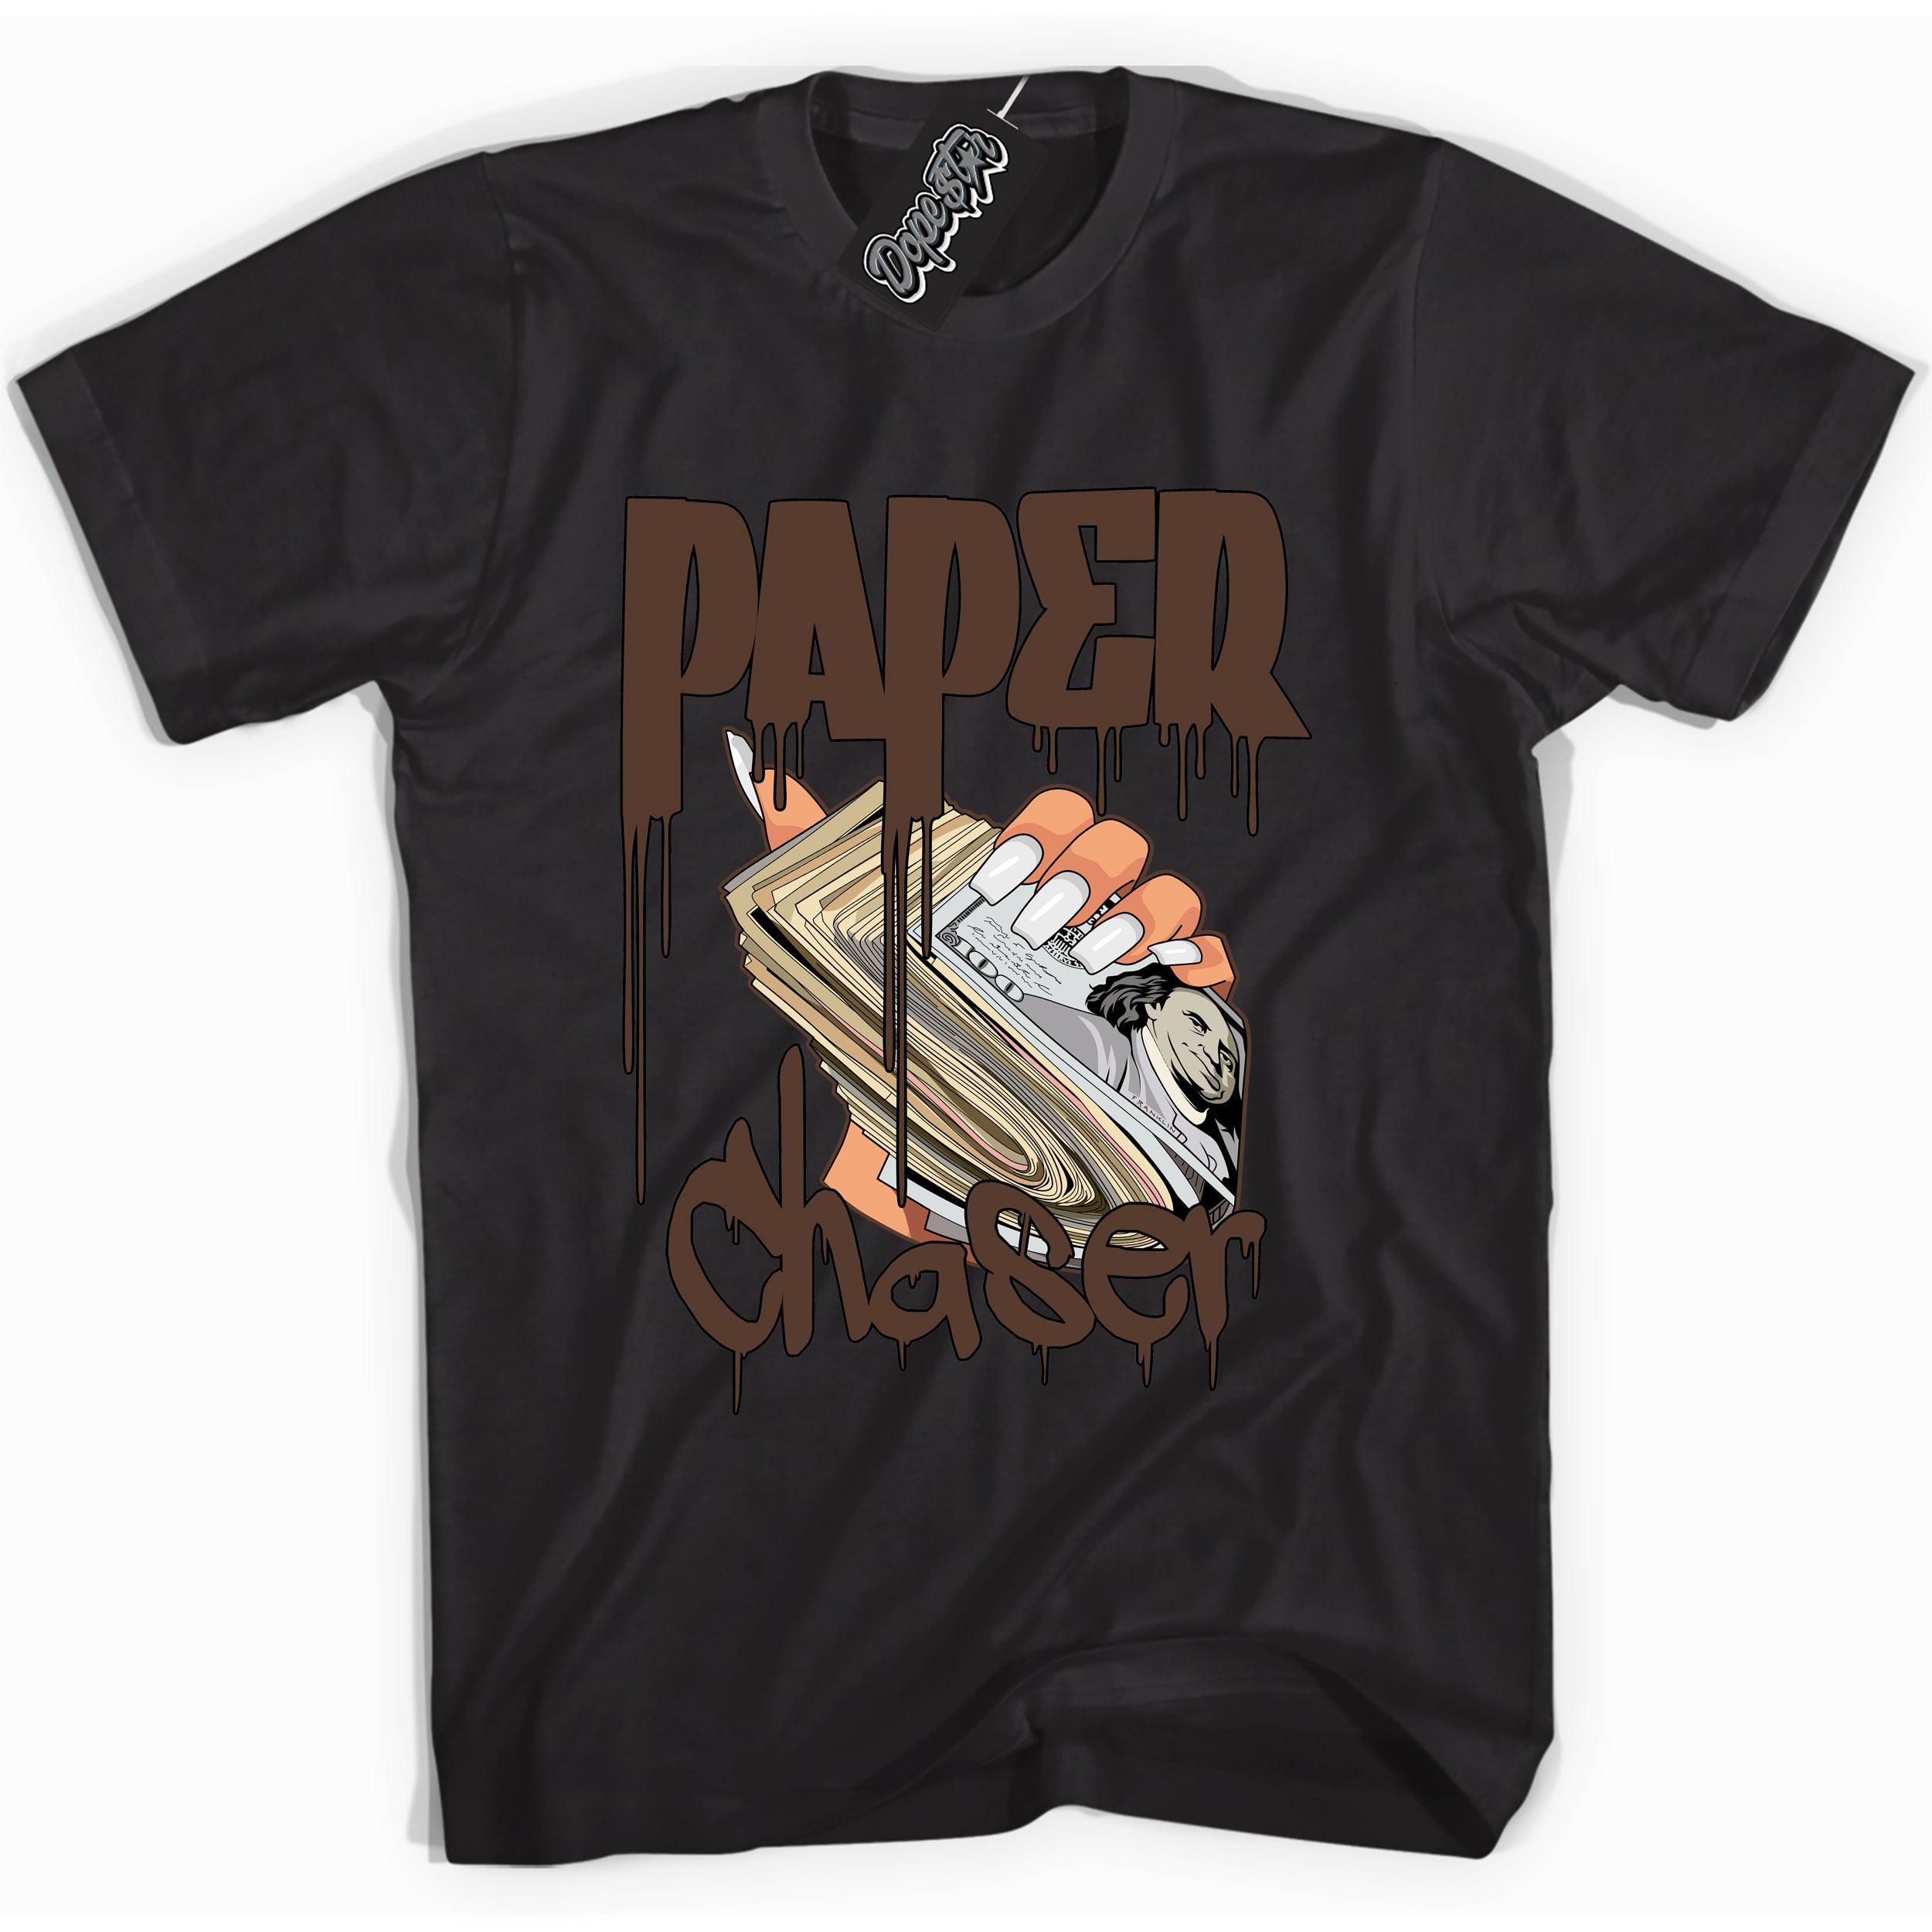 Cool Black graphic tee with “ Paper Chaser ” design, that perfectly matches Palomino 1s sneakers 